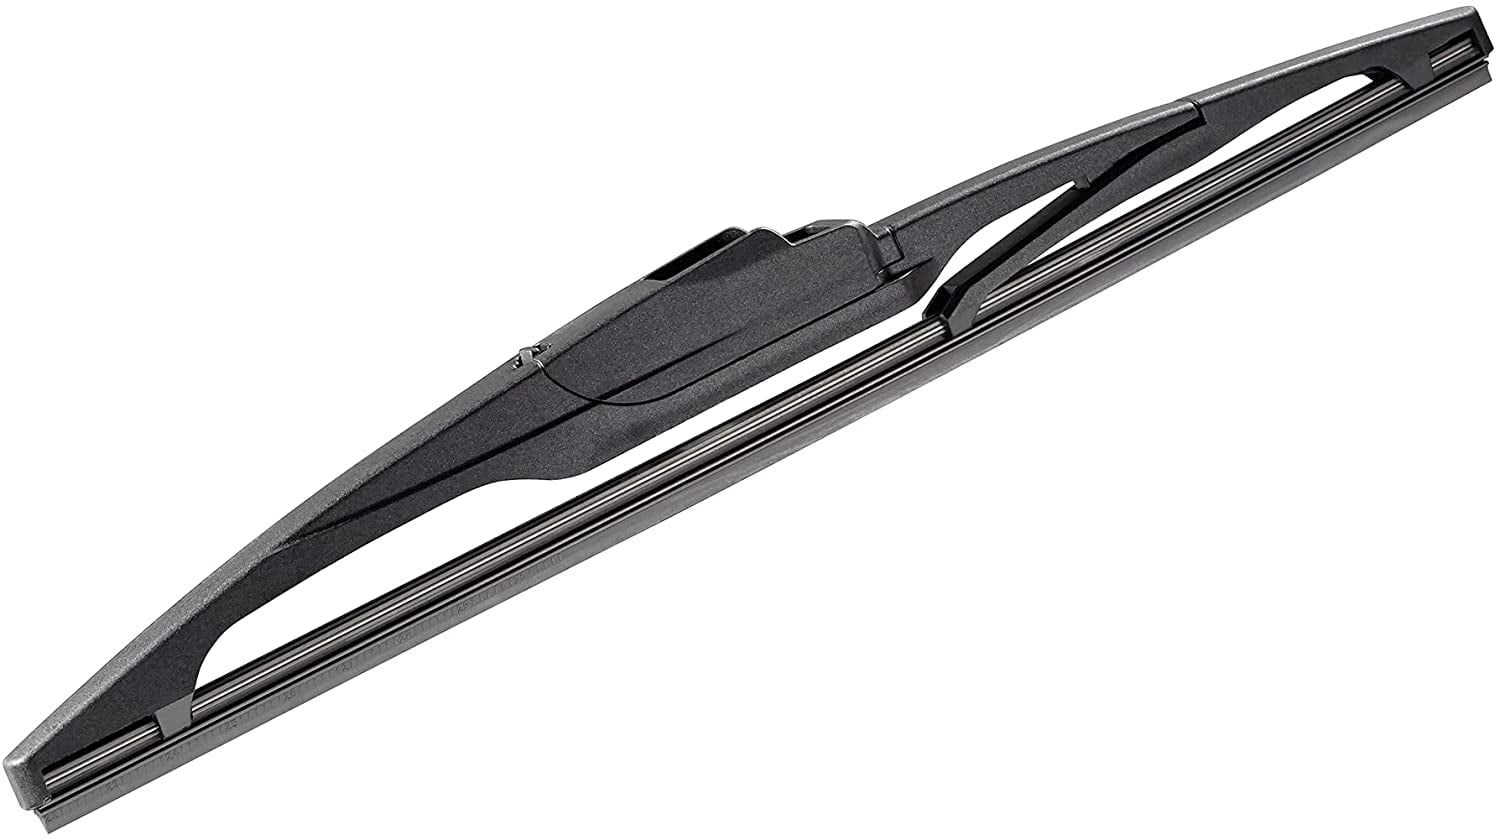 MOTIUM 15+15 Super Silicone Windshield Wiper Blades Fit for J hook Wiper Arms set of 2 